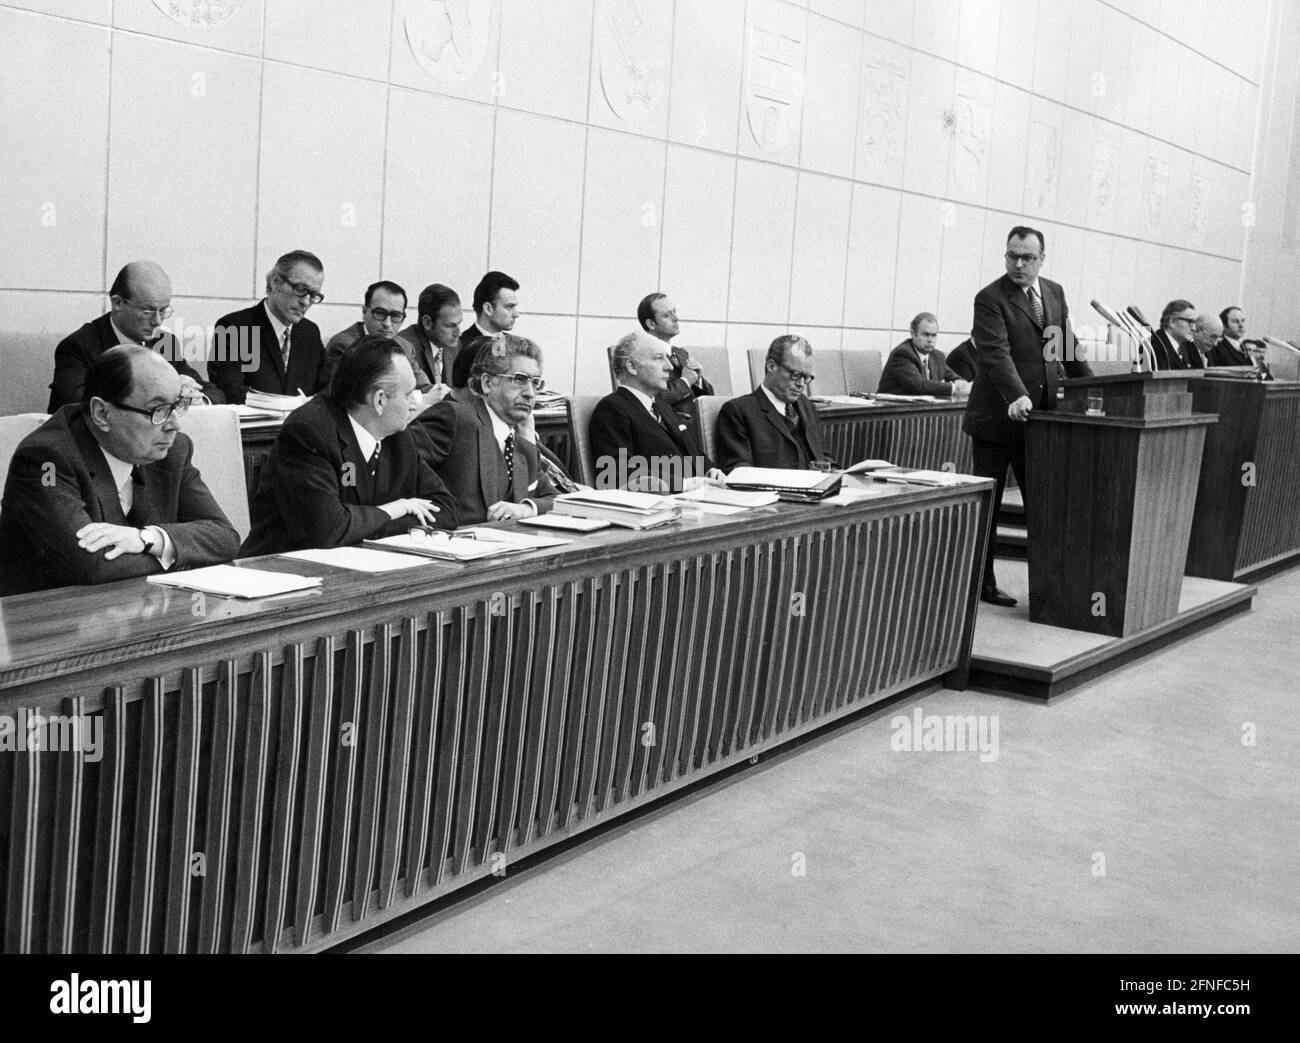 During the ratification procedure of the treaties with Eastern Europe, Helmut Kohl speaks to the CDU-governed states in the Bundesrat. At the lectern, Dr. Helmut Kohl, Minister-President of Rhineland-Palatinate. On the government bench, from left, Dr. Paul Frank, Egon Rahr, Gerhard Jahn, Walter Scheel and Federal Chancellor Willy Brandt. [automated translation] Stock Photo